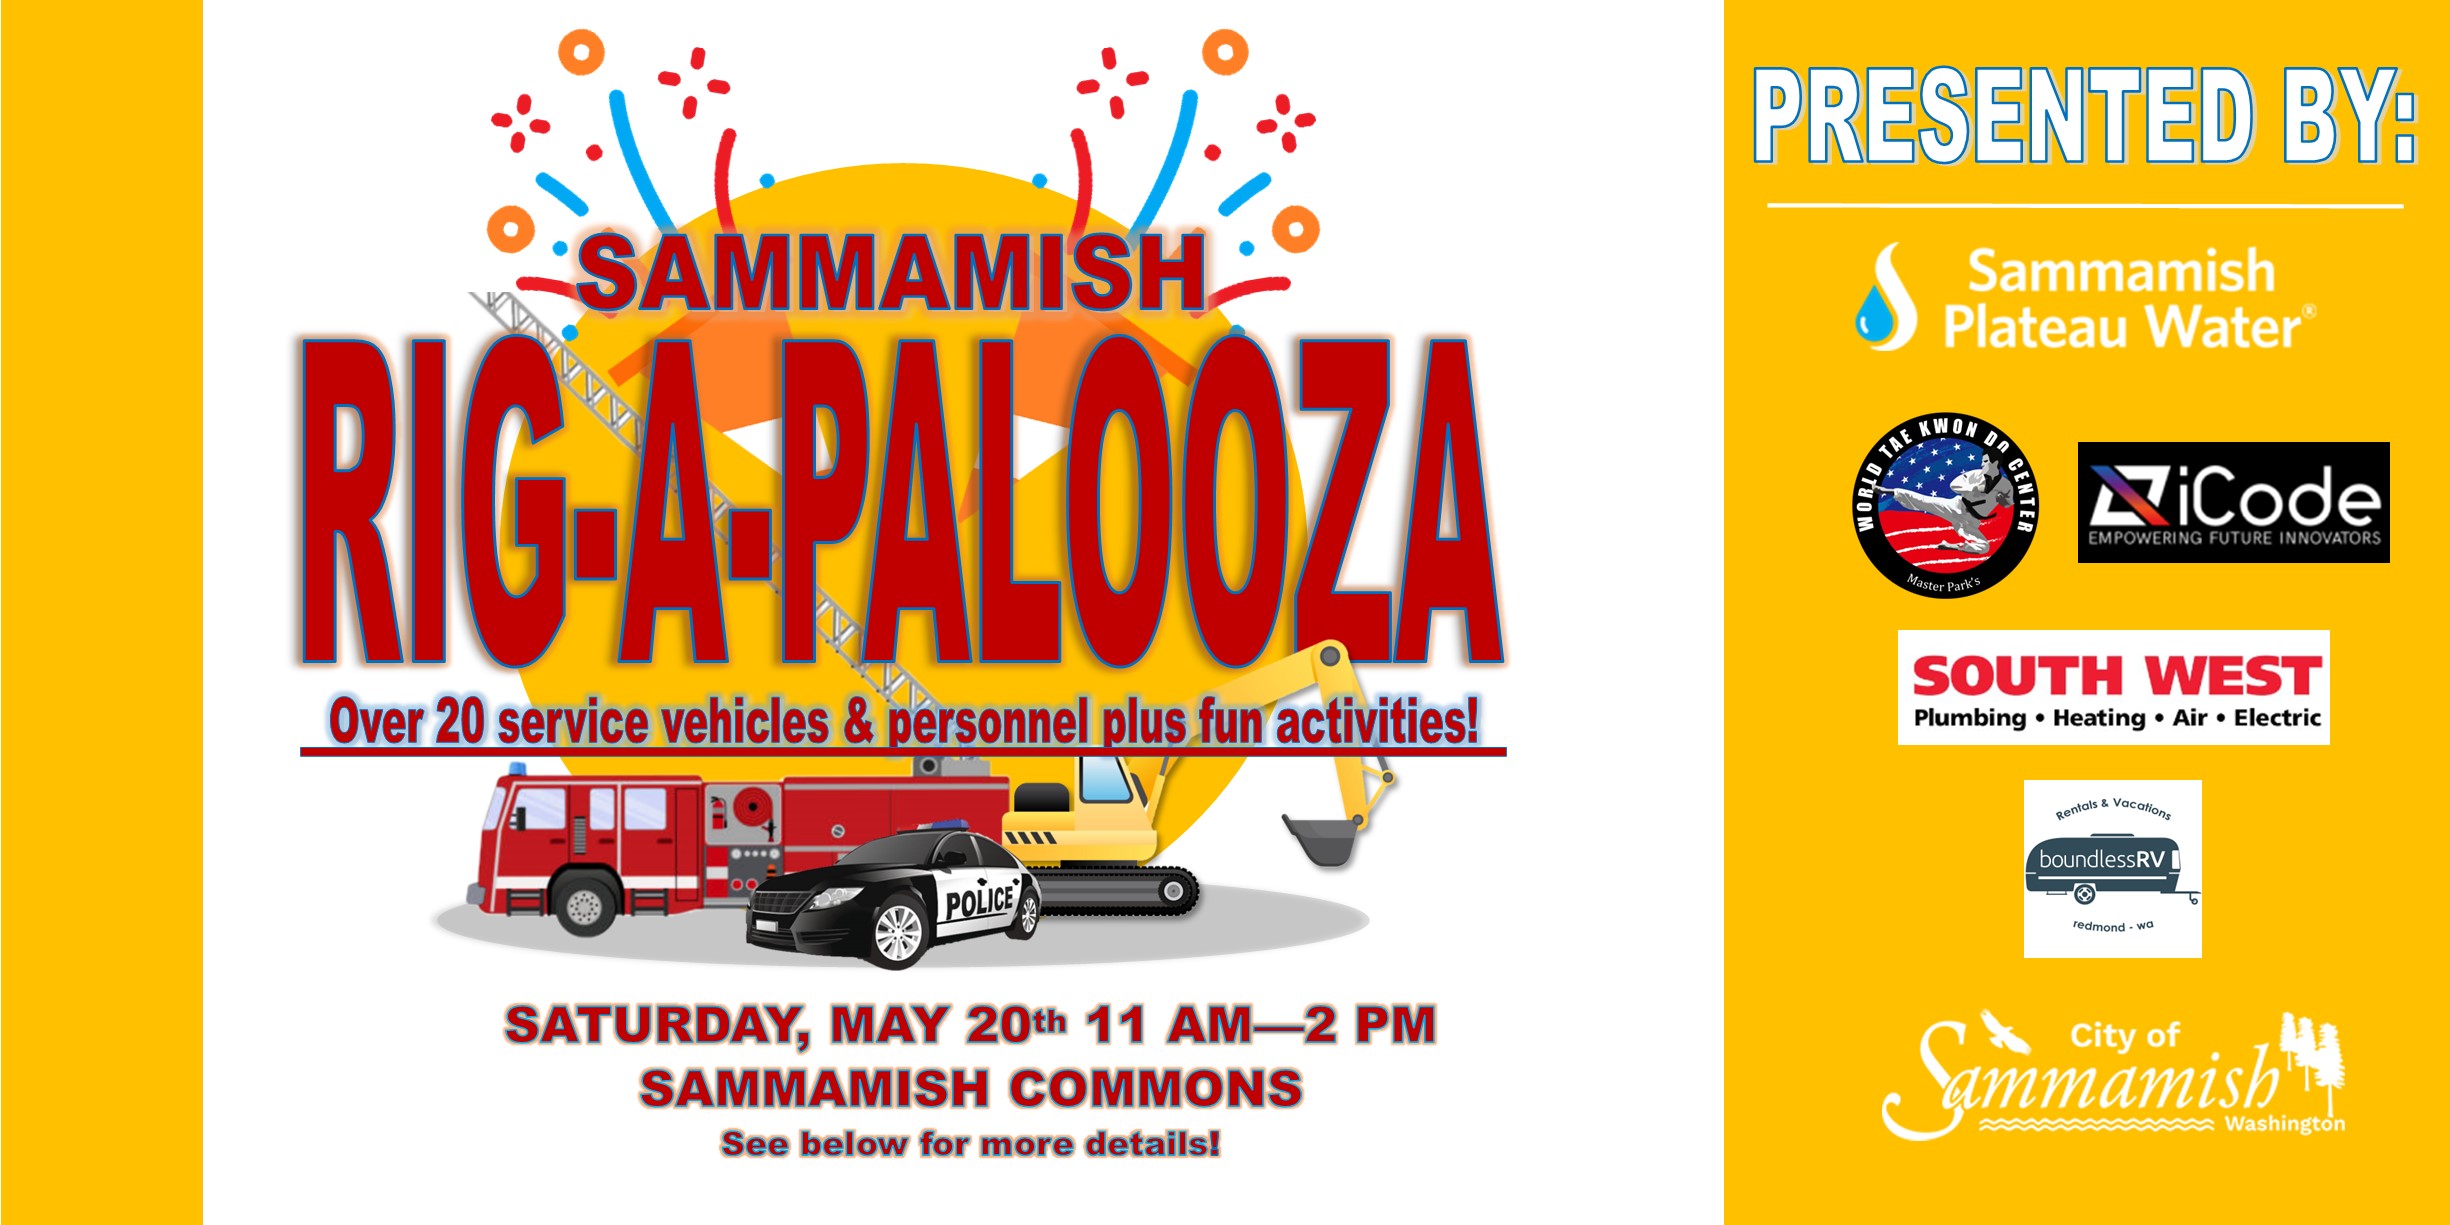 Sammamish Rig-A-Palooza, over 20 service vehicles and personnel plus fun activities! Saturday, May 20th 11 a.m. – 2 p.m. Sammamish Common, see below for more details. Presented by: Sammamish Plateau Water, World Tae Kwon Do Center, iCode – empowering future innovators, South West Plumbing, Heating, Air, Electric, Boundless RV, and the City of Sammamish, Washington